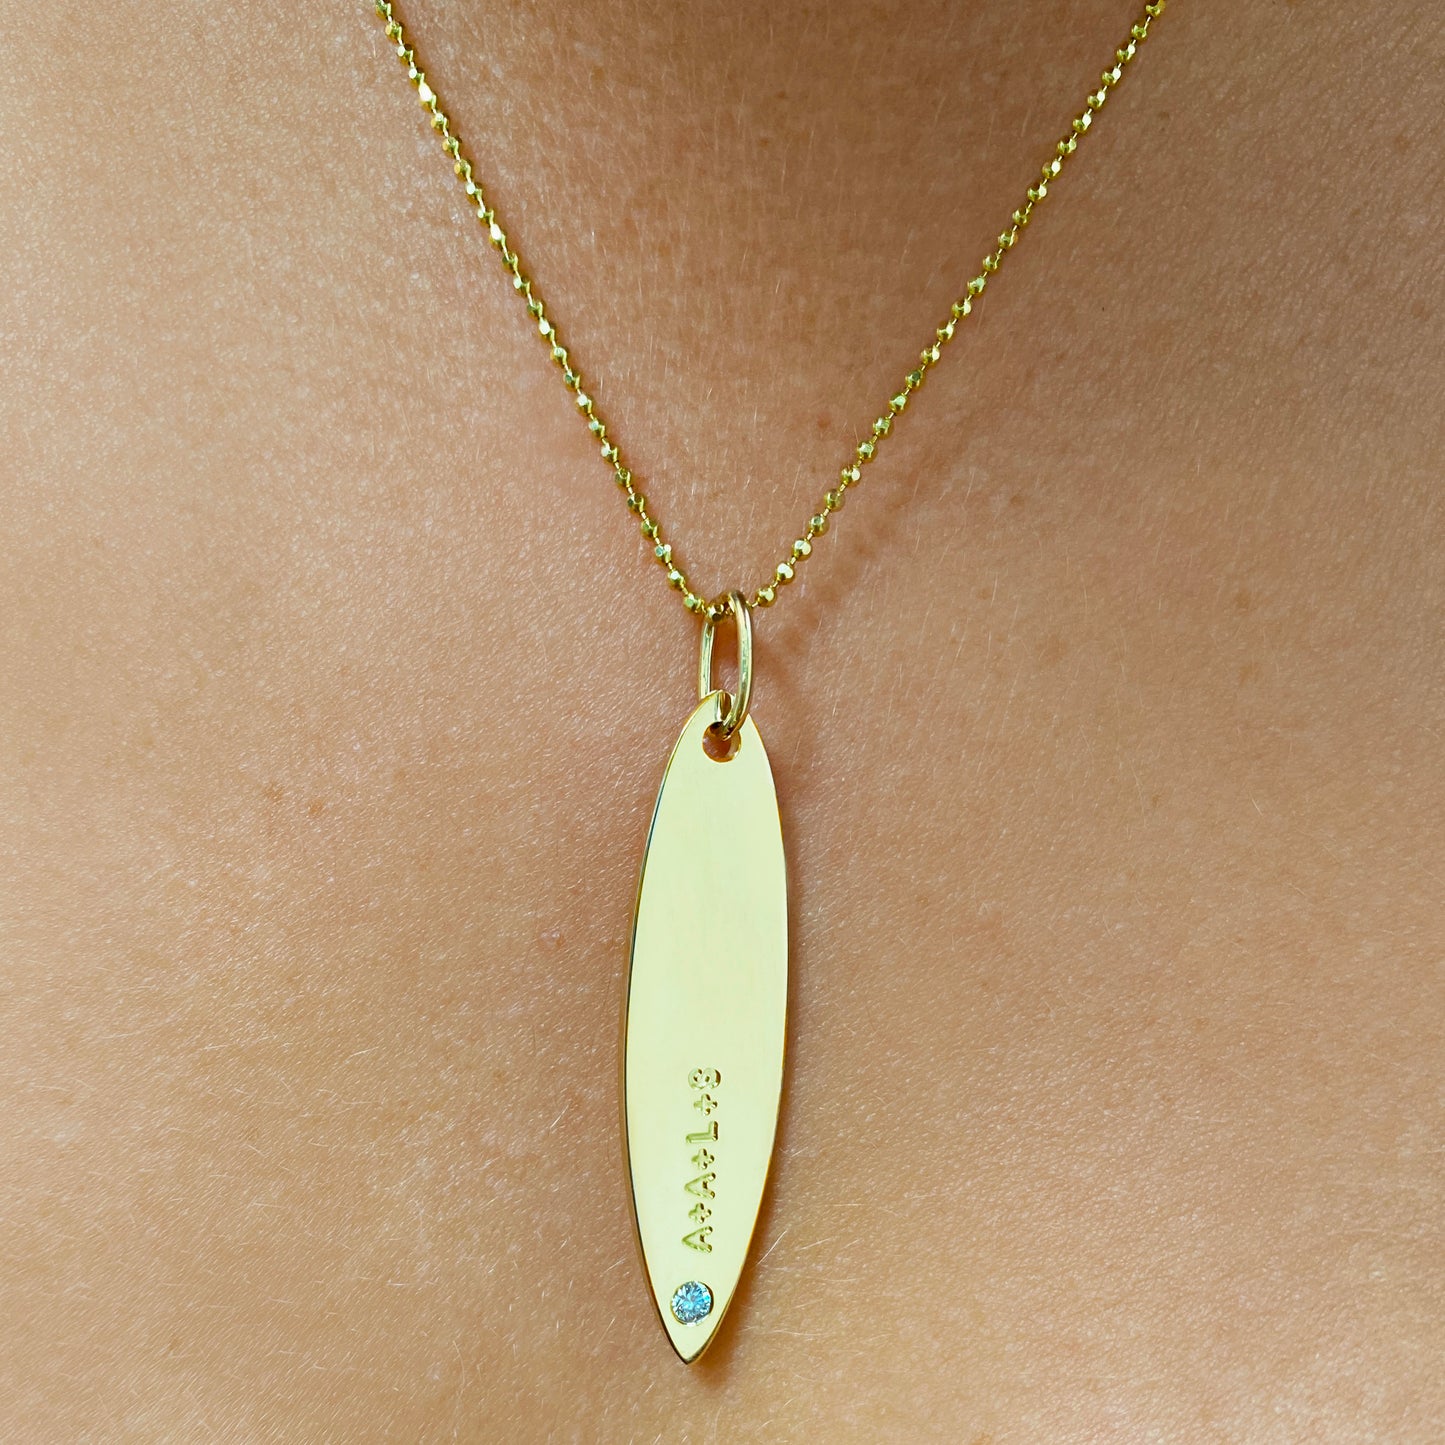 14k gold surfboard charm lock with A+A+L+S engraved and diamond. Styled on a neck hanging from a diamond cut bead necklace.